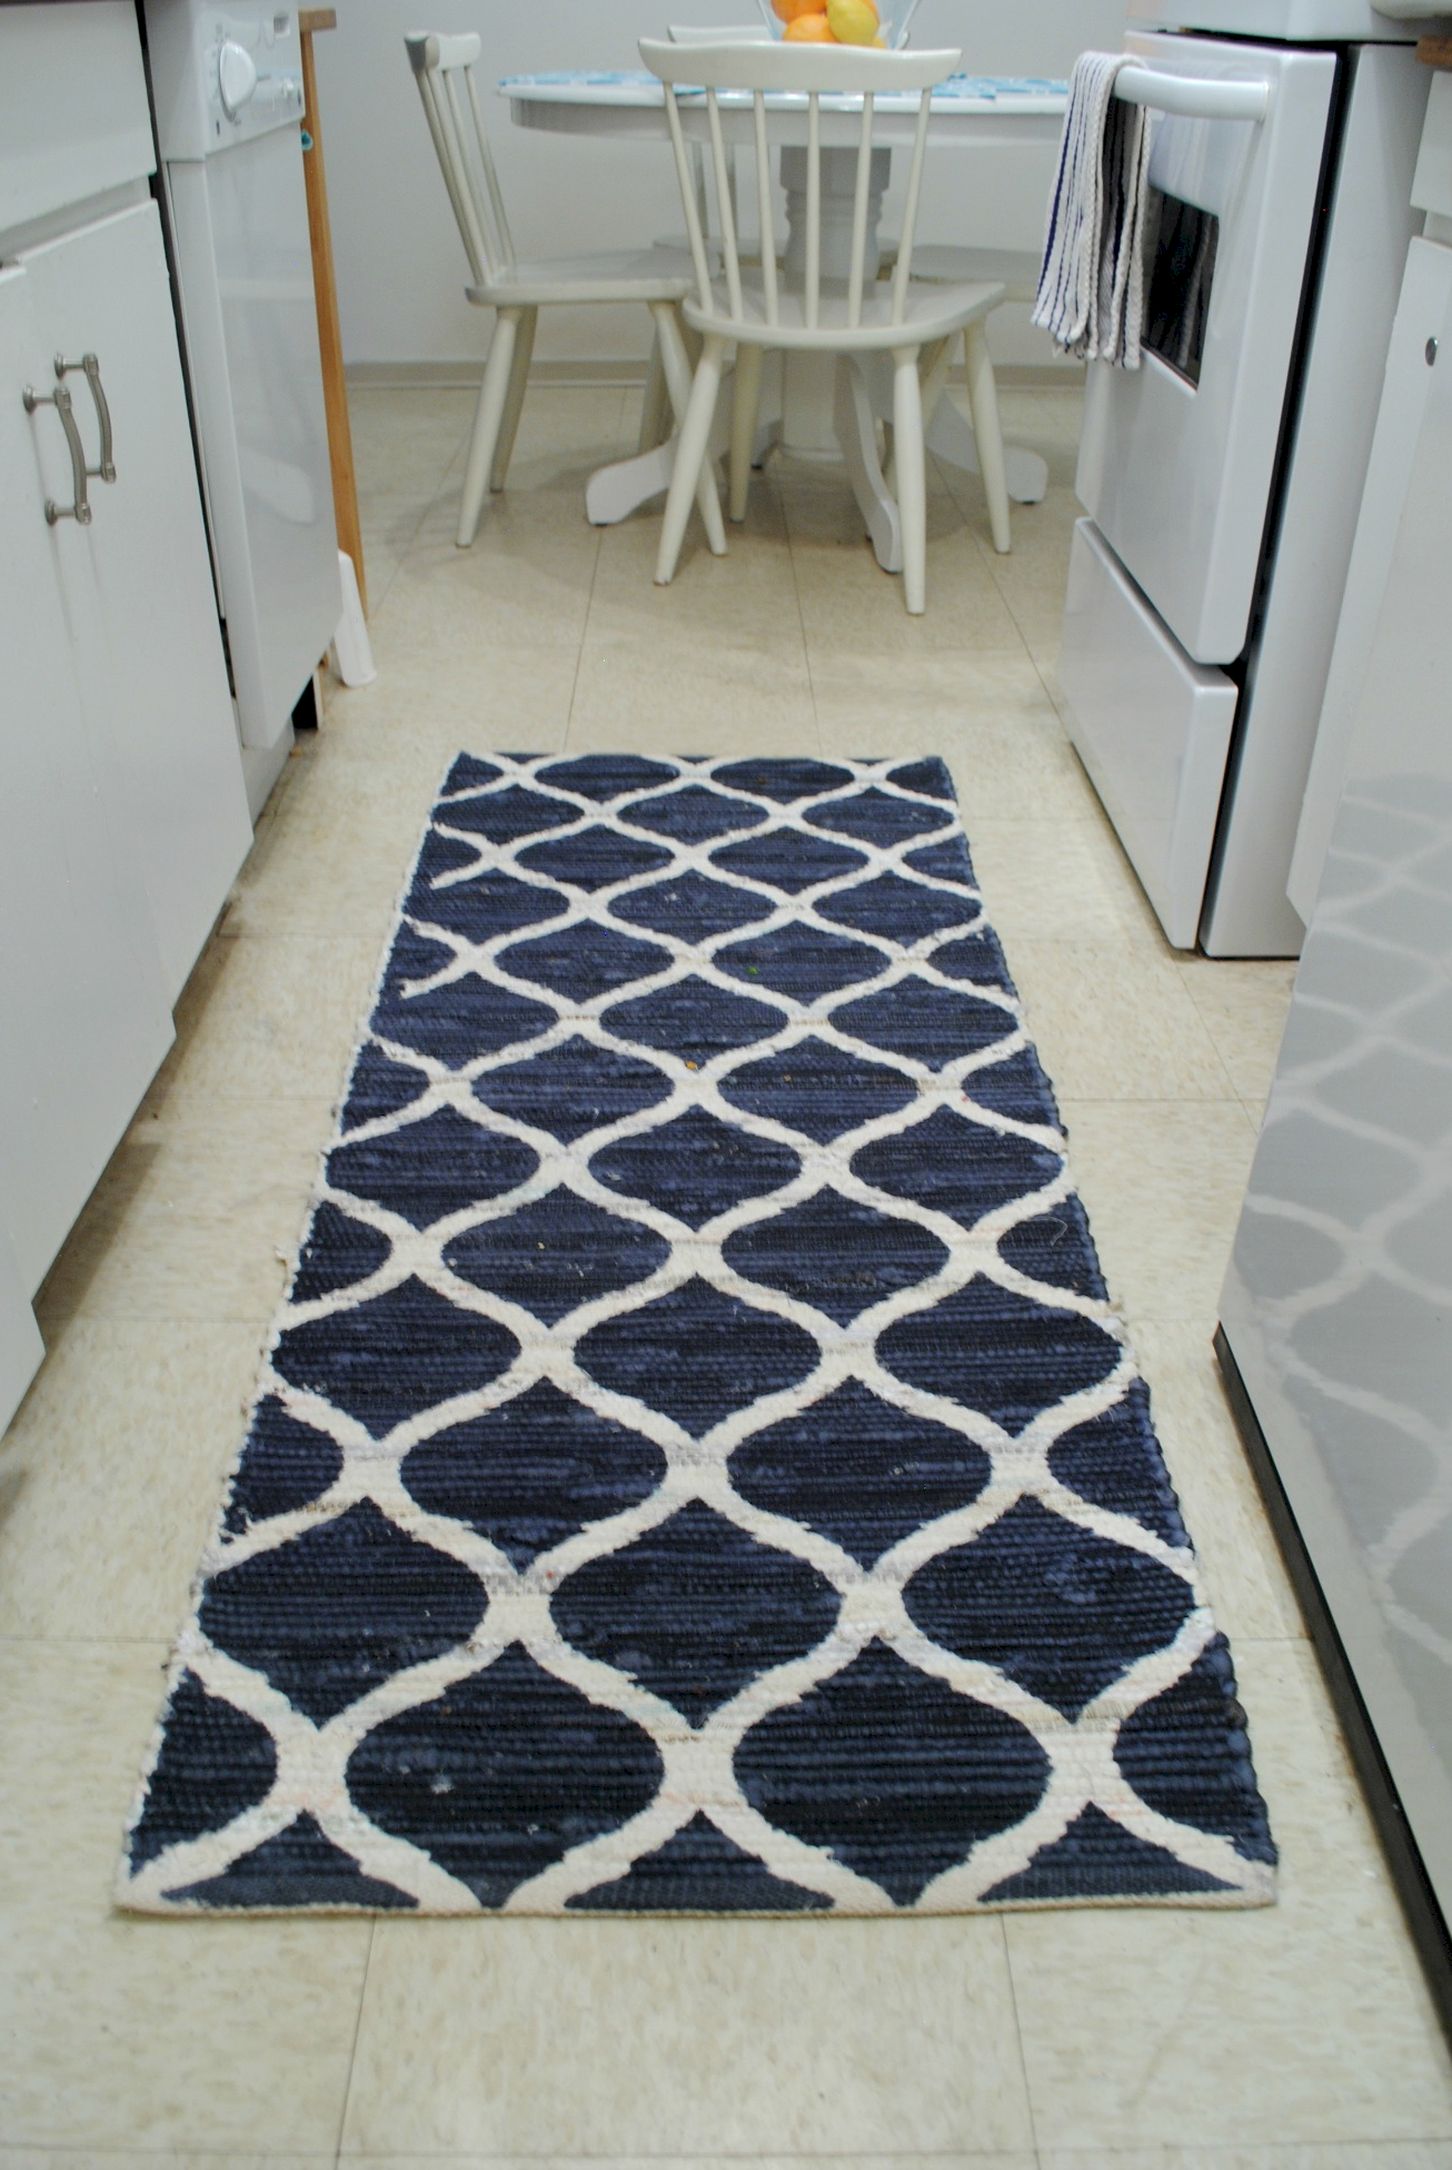 Kitchen Rugs And Runners photo - 2